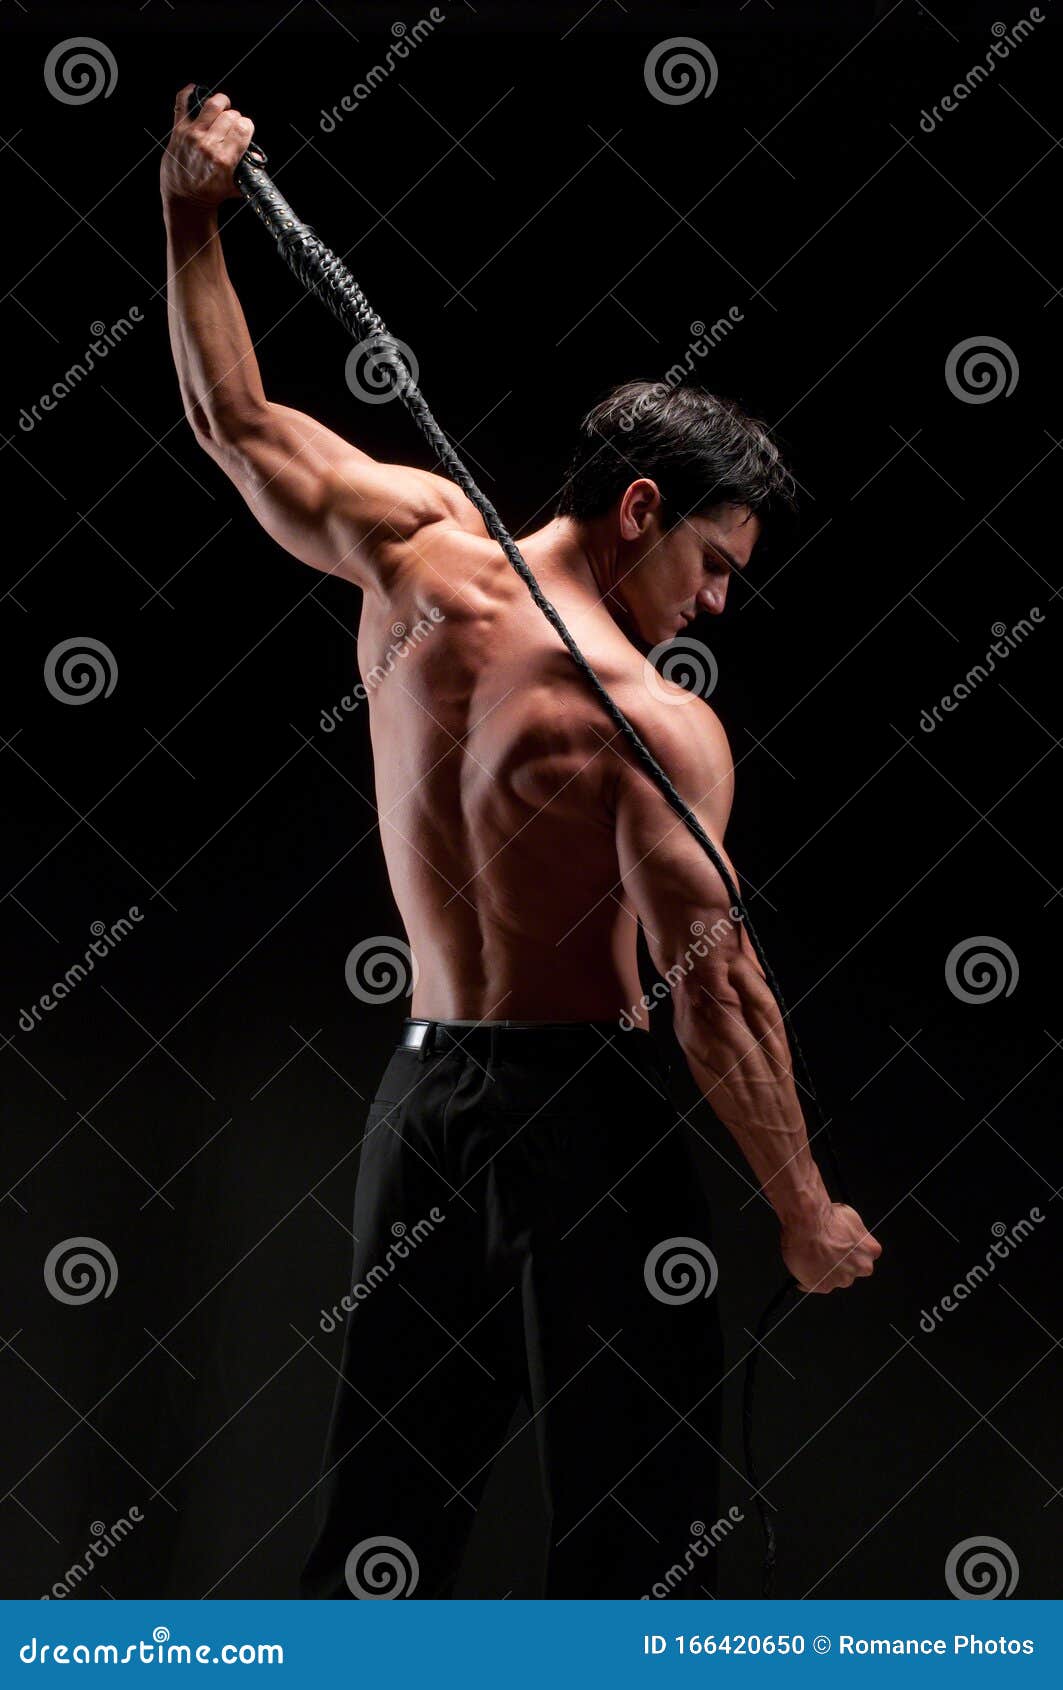 Asian Man Acting Poses Camera Isolate Stock Photo 591757121 | Shutterstock